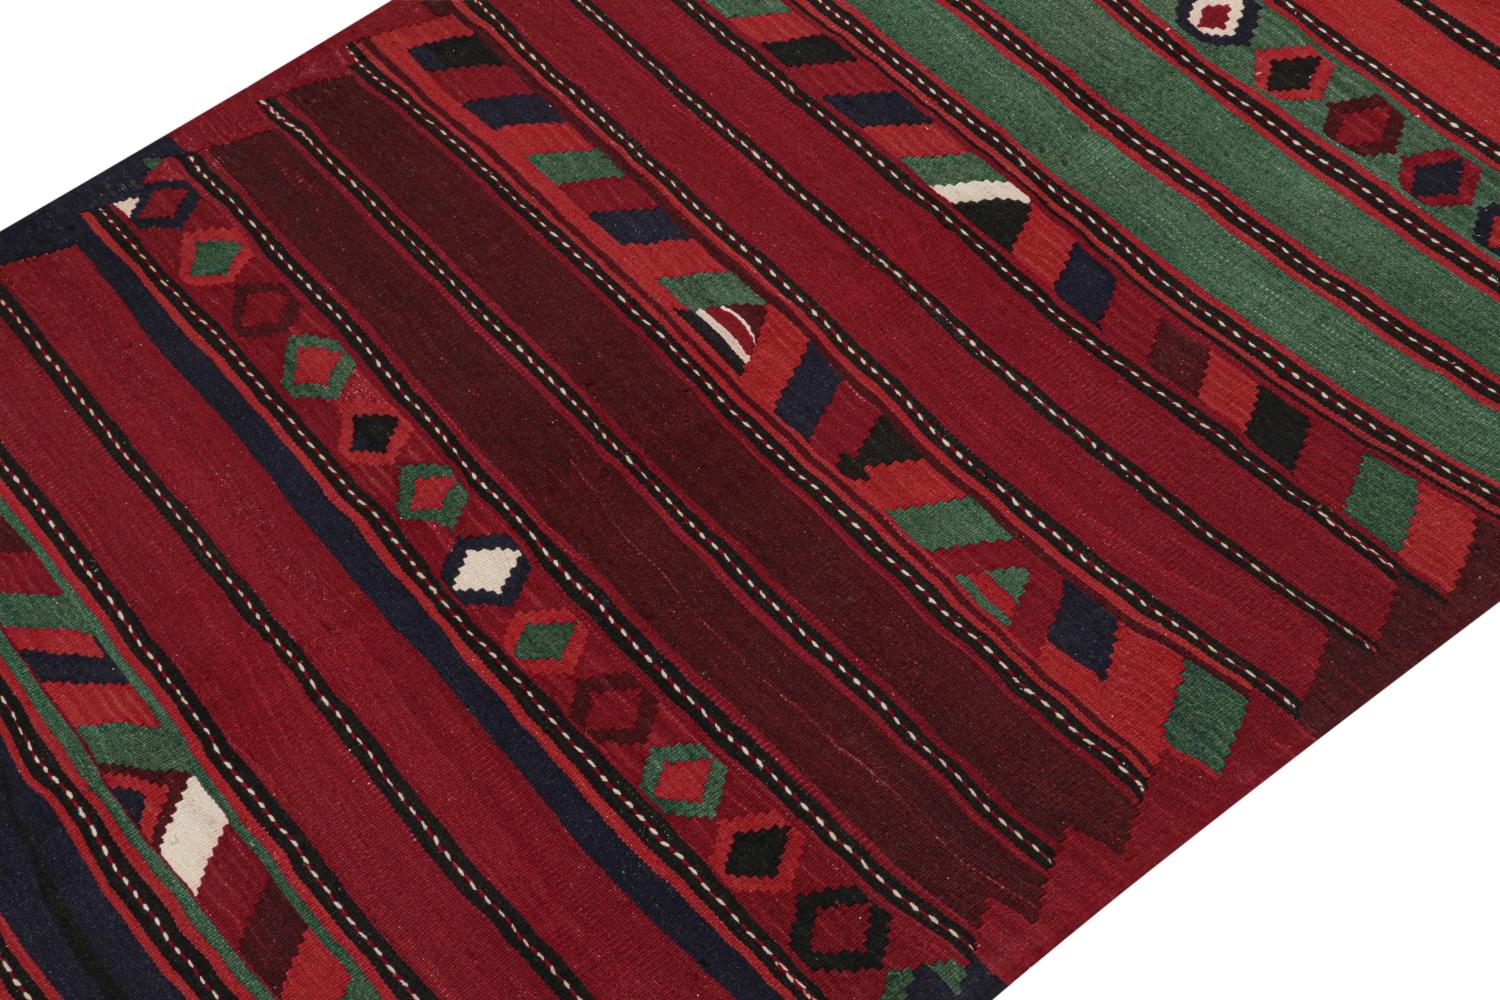 This vintage 6x12 Persian Kilim is a rare midcentury Bidjar tribal rug, handwoven in wool circa 1950-1960.

On the Design: 

This particular Bidjar Kilim marks a creative employ of a minimal palette in its use of reds, blues, and greens. Keen